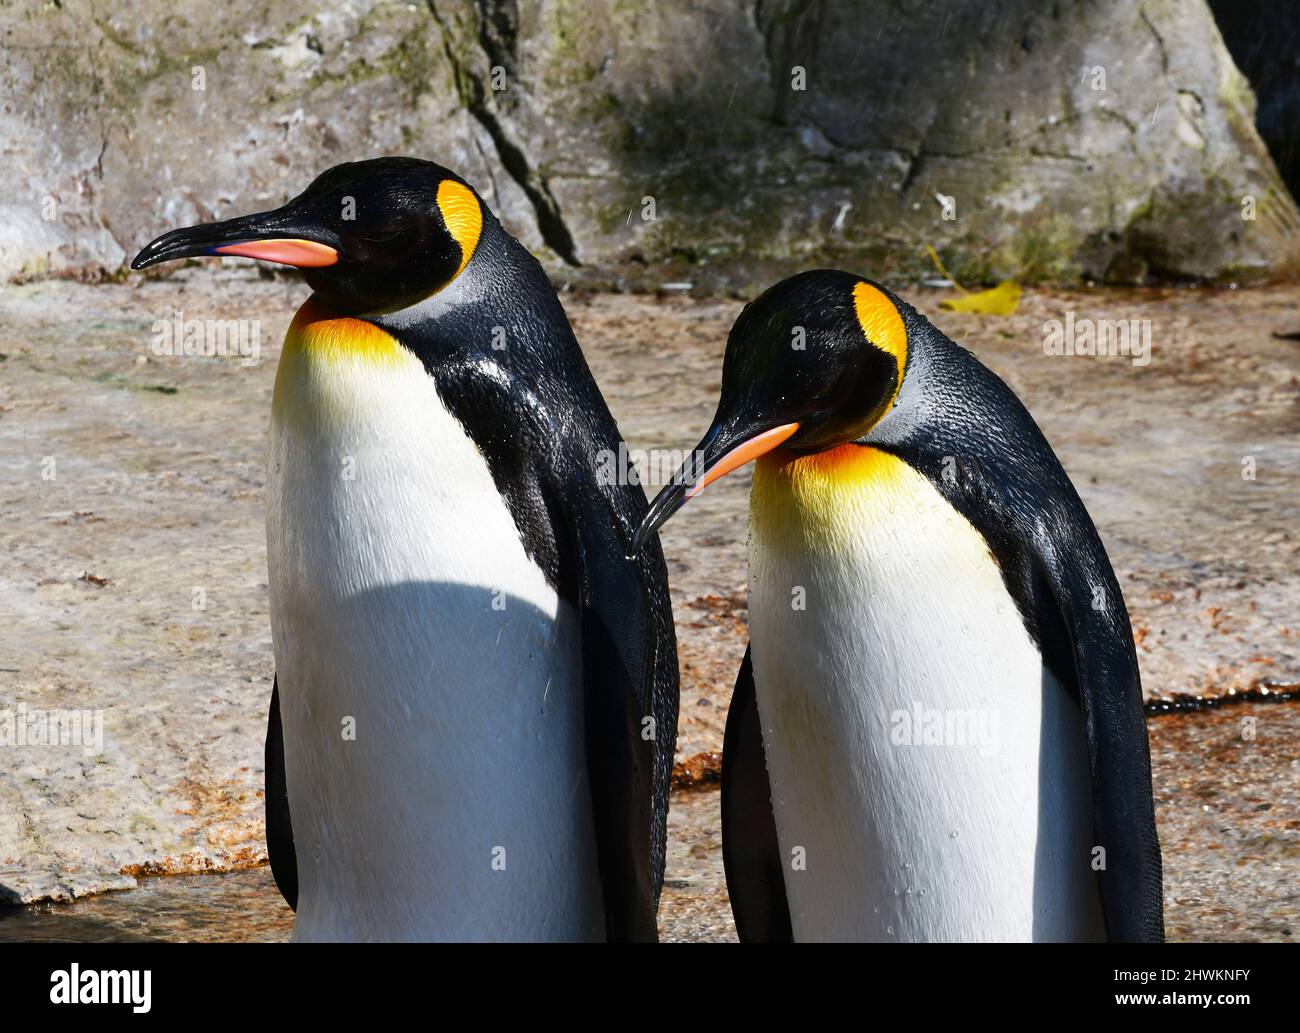 King Penguins in the Penguin Enclosure at Birdland Park and Gardens in Bourton-on-the-Water, Gloucestershire, UK Stock Photo